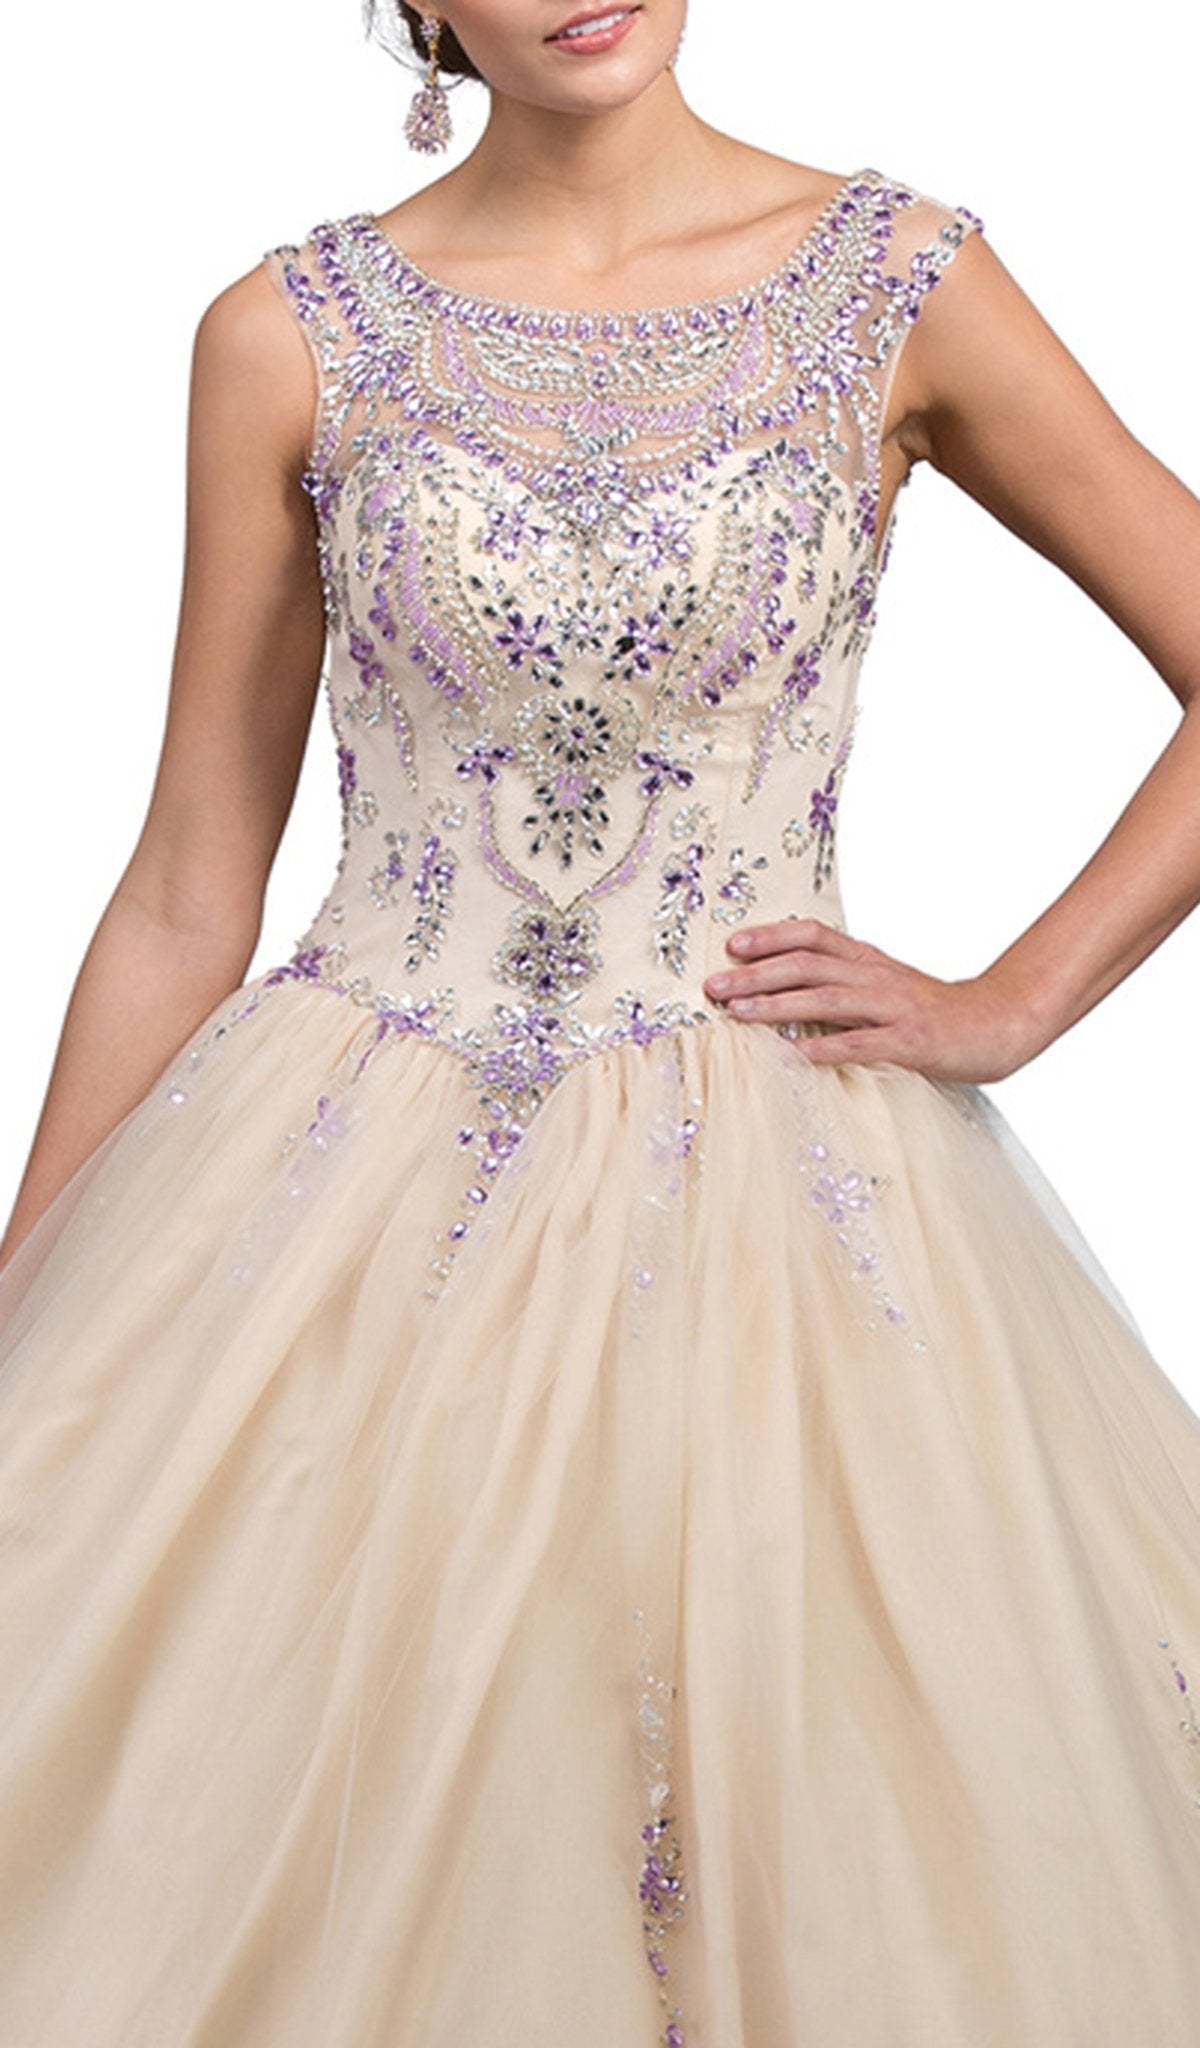 Dancing Queen - 1232 Bejeweled Illusion Bateau Quinceanera Ballgown Special Occasion Dress